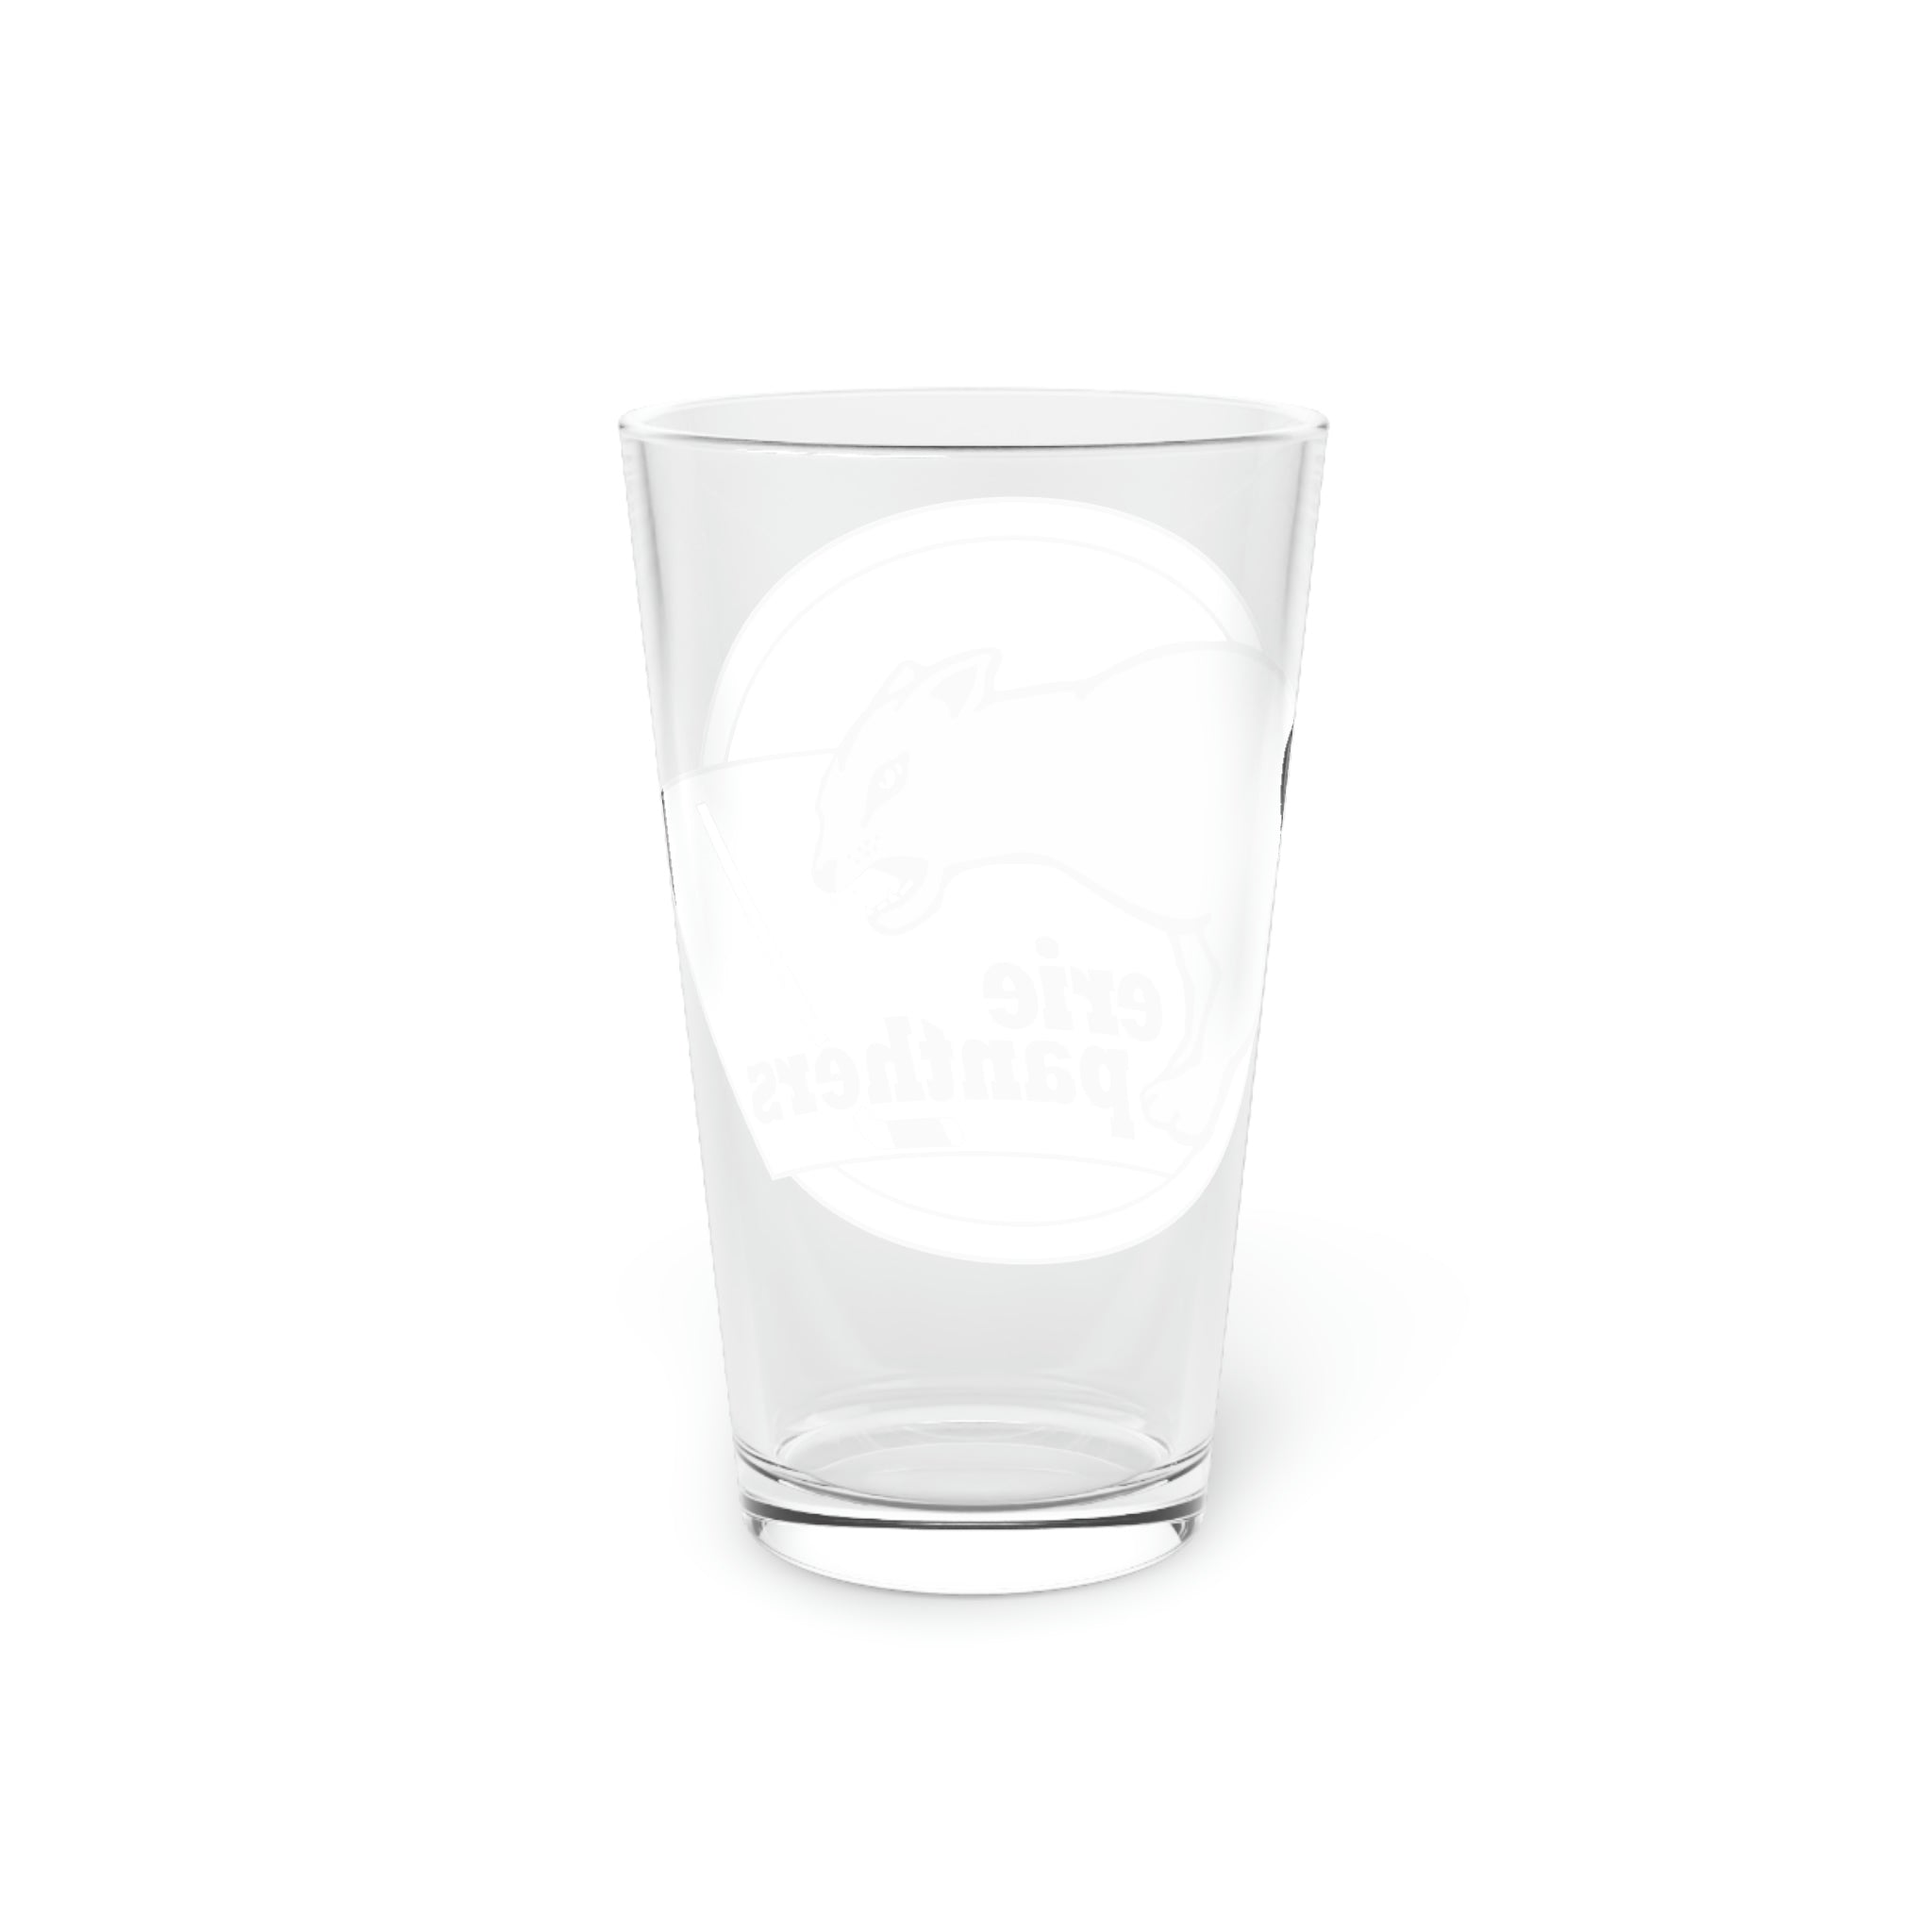 Erie Panthers Pint Glass